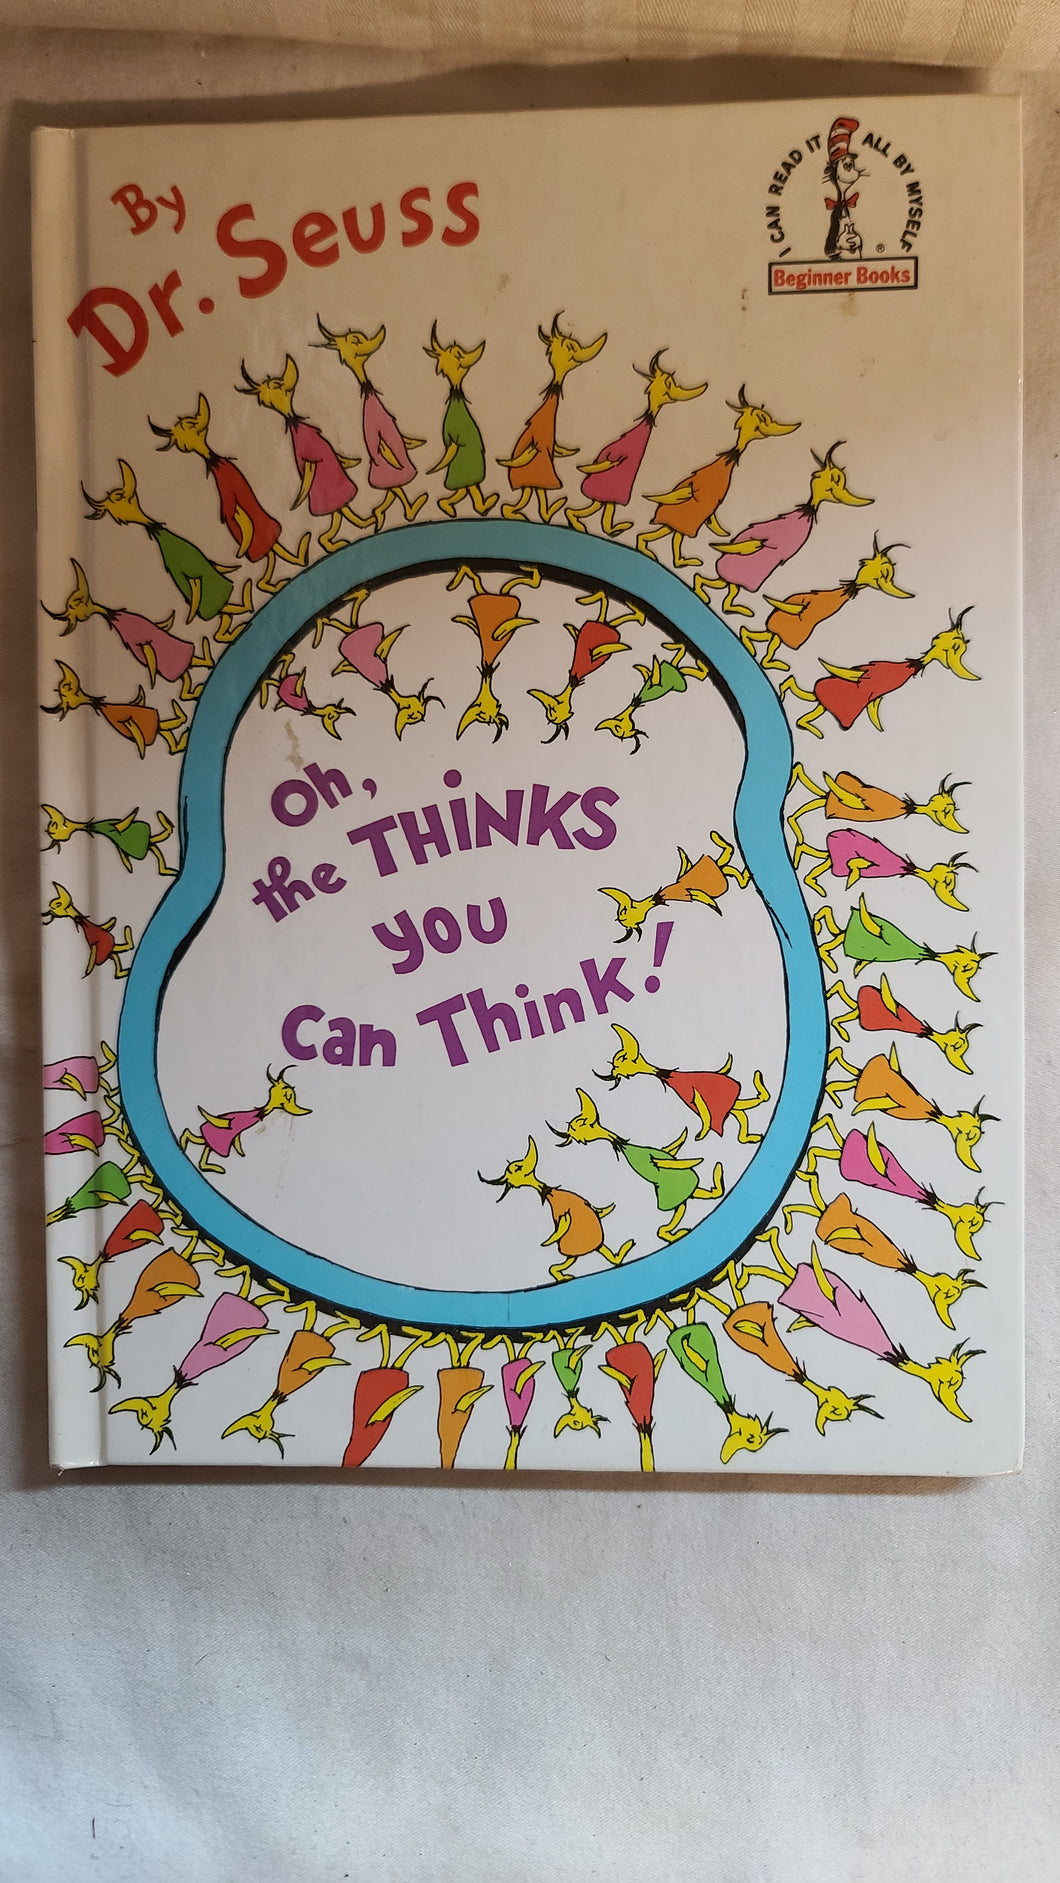 Oh the Thinks you can Think! By Dr. Seuss 